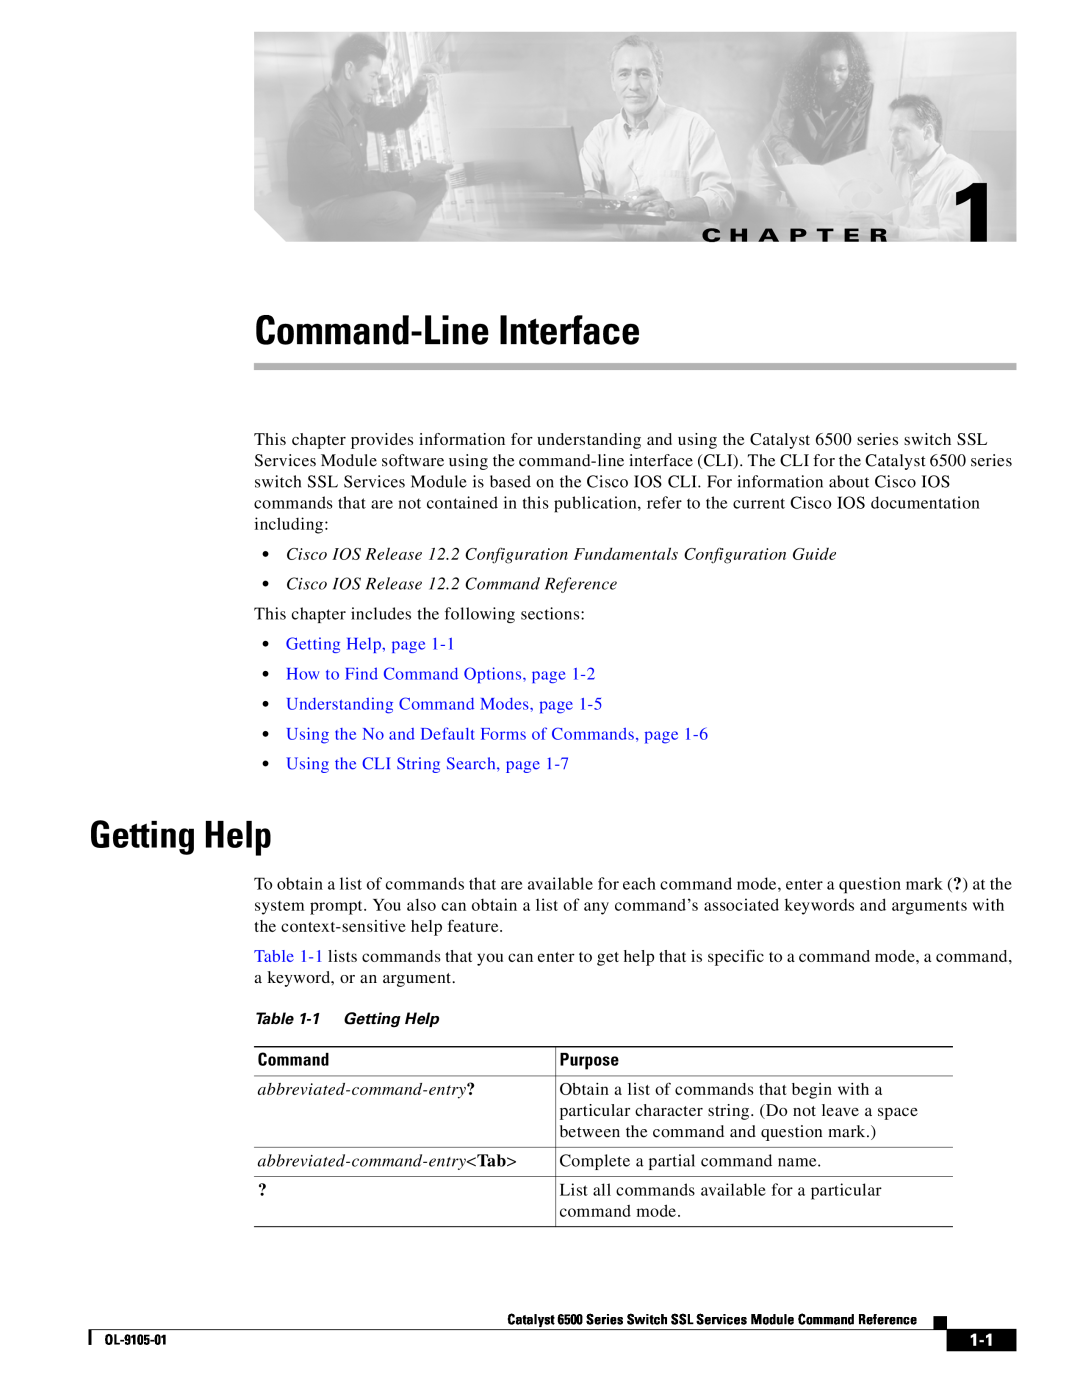 Cisco Systems 6500 manual Command-Line Interface, Getting Help, C H A P T E R, Understanding Command Modes, page, Purpose 